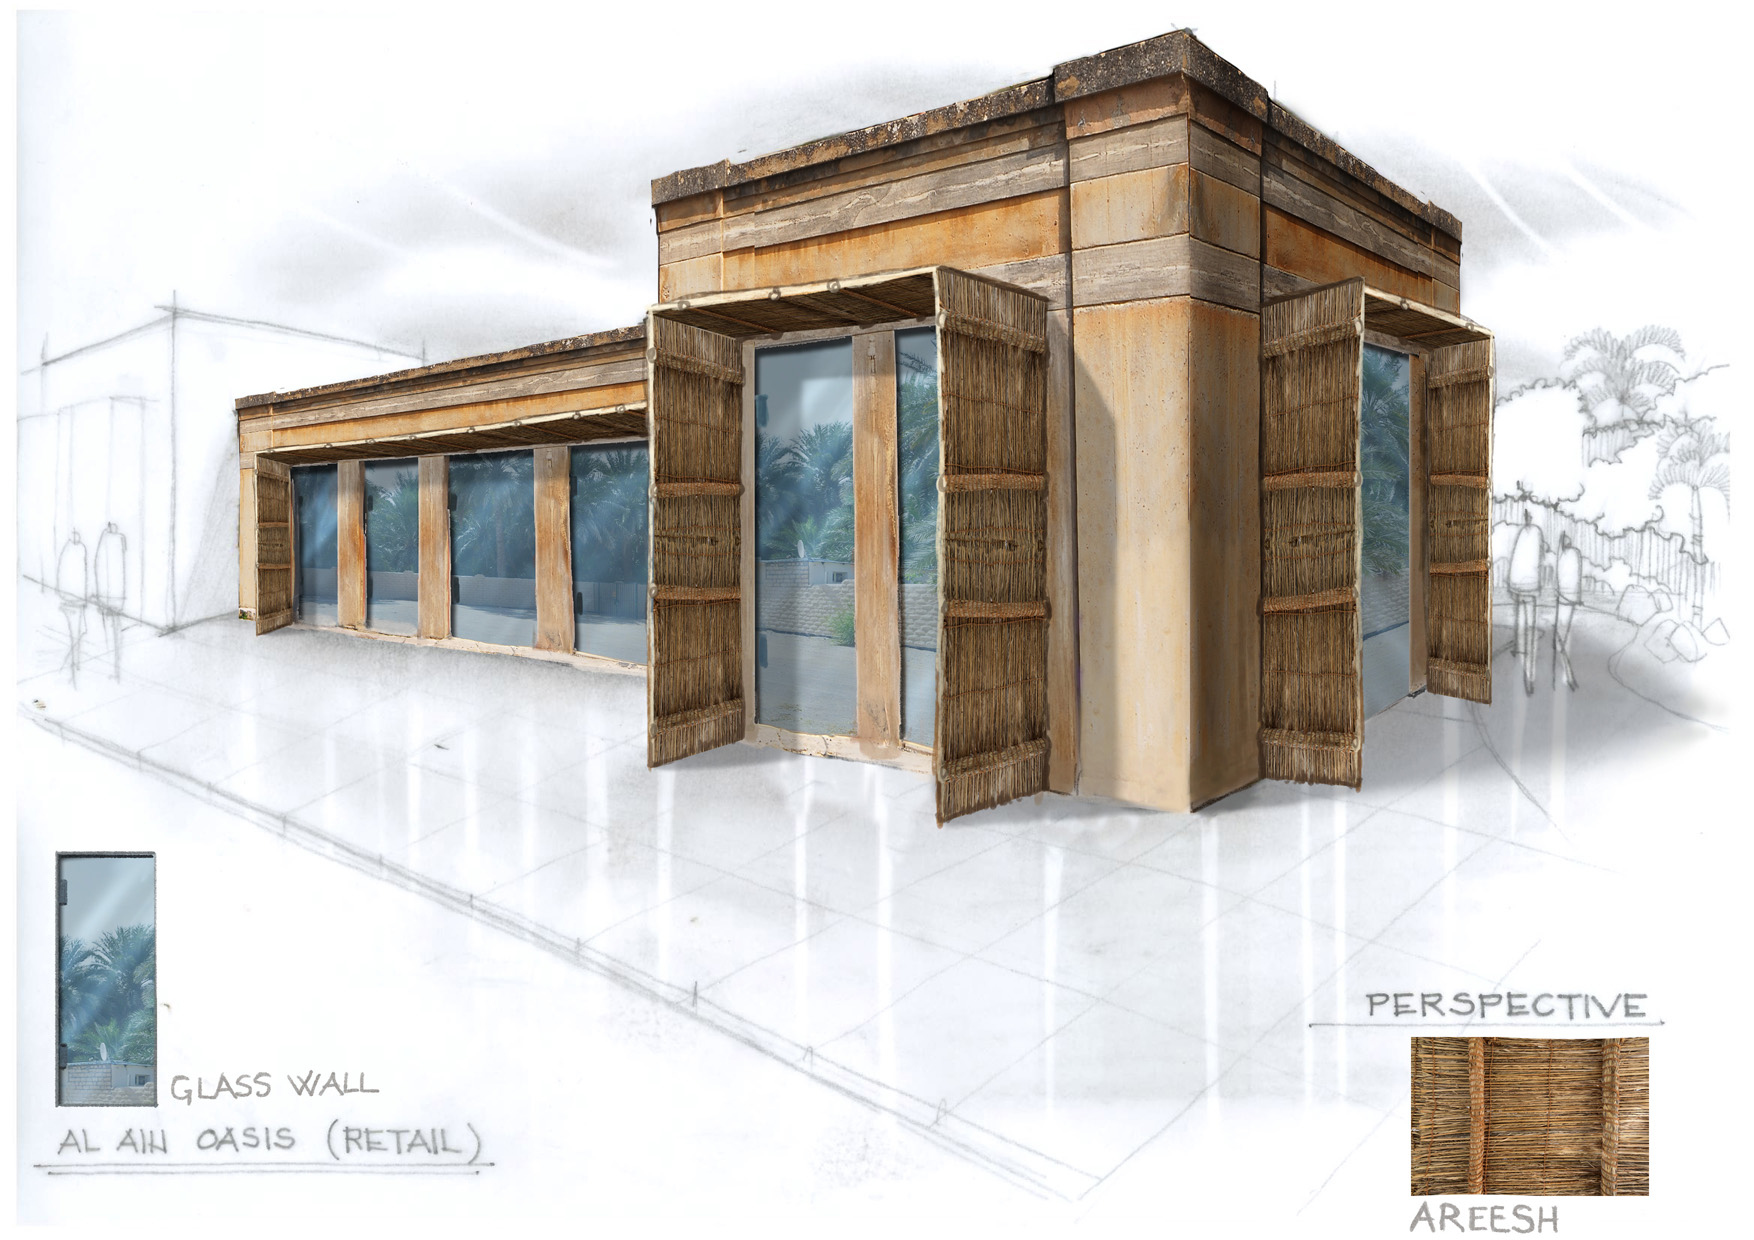 Al Ain Oasis - Concept sketches for retail and F&B